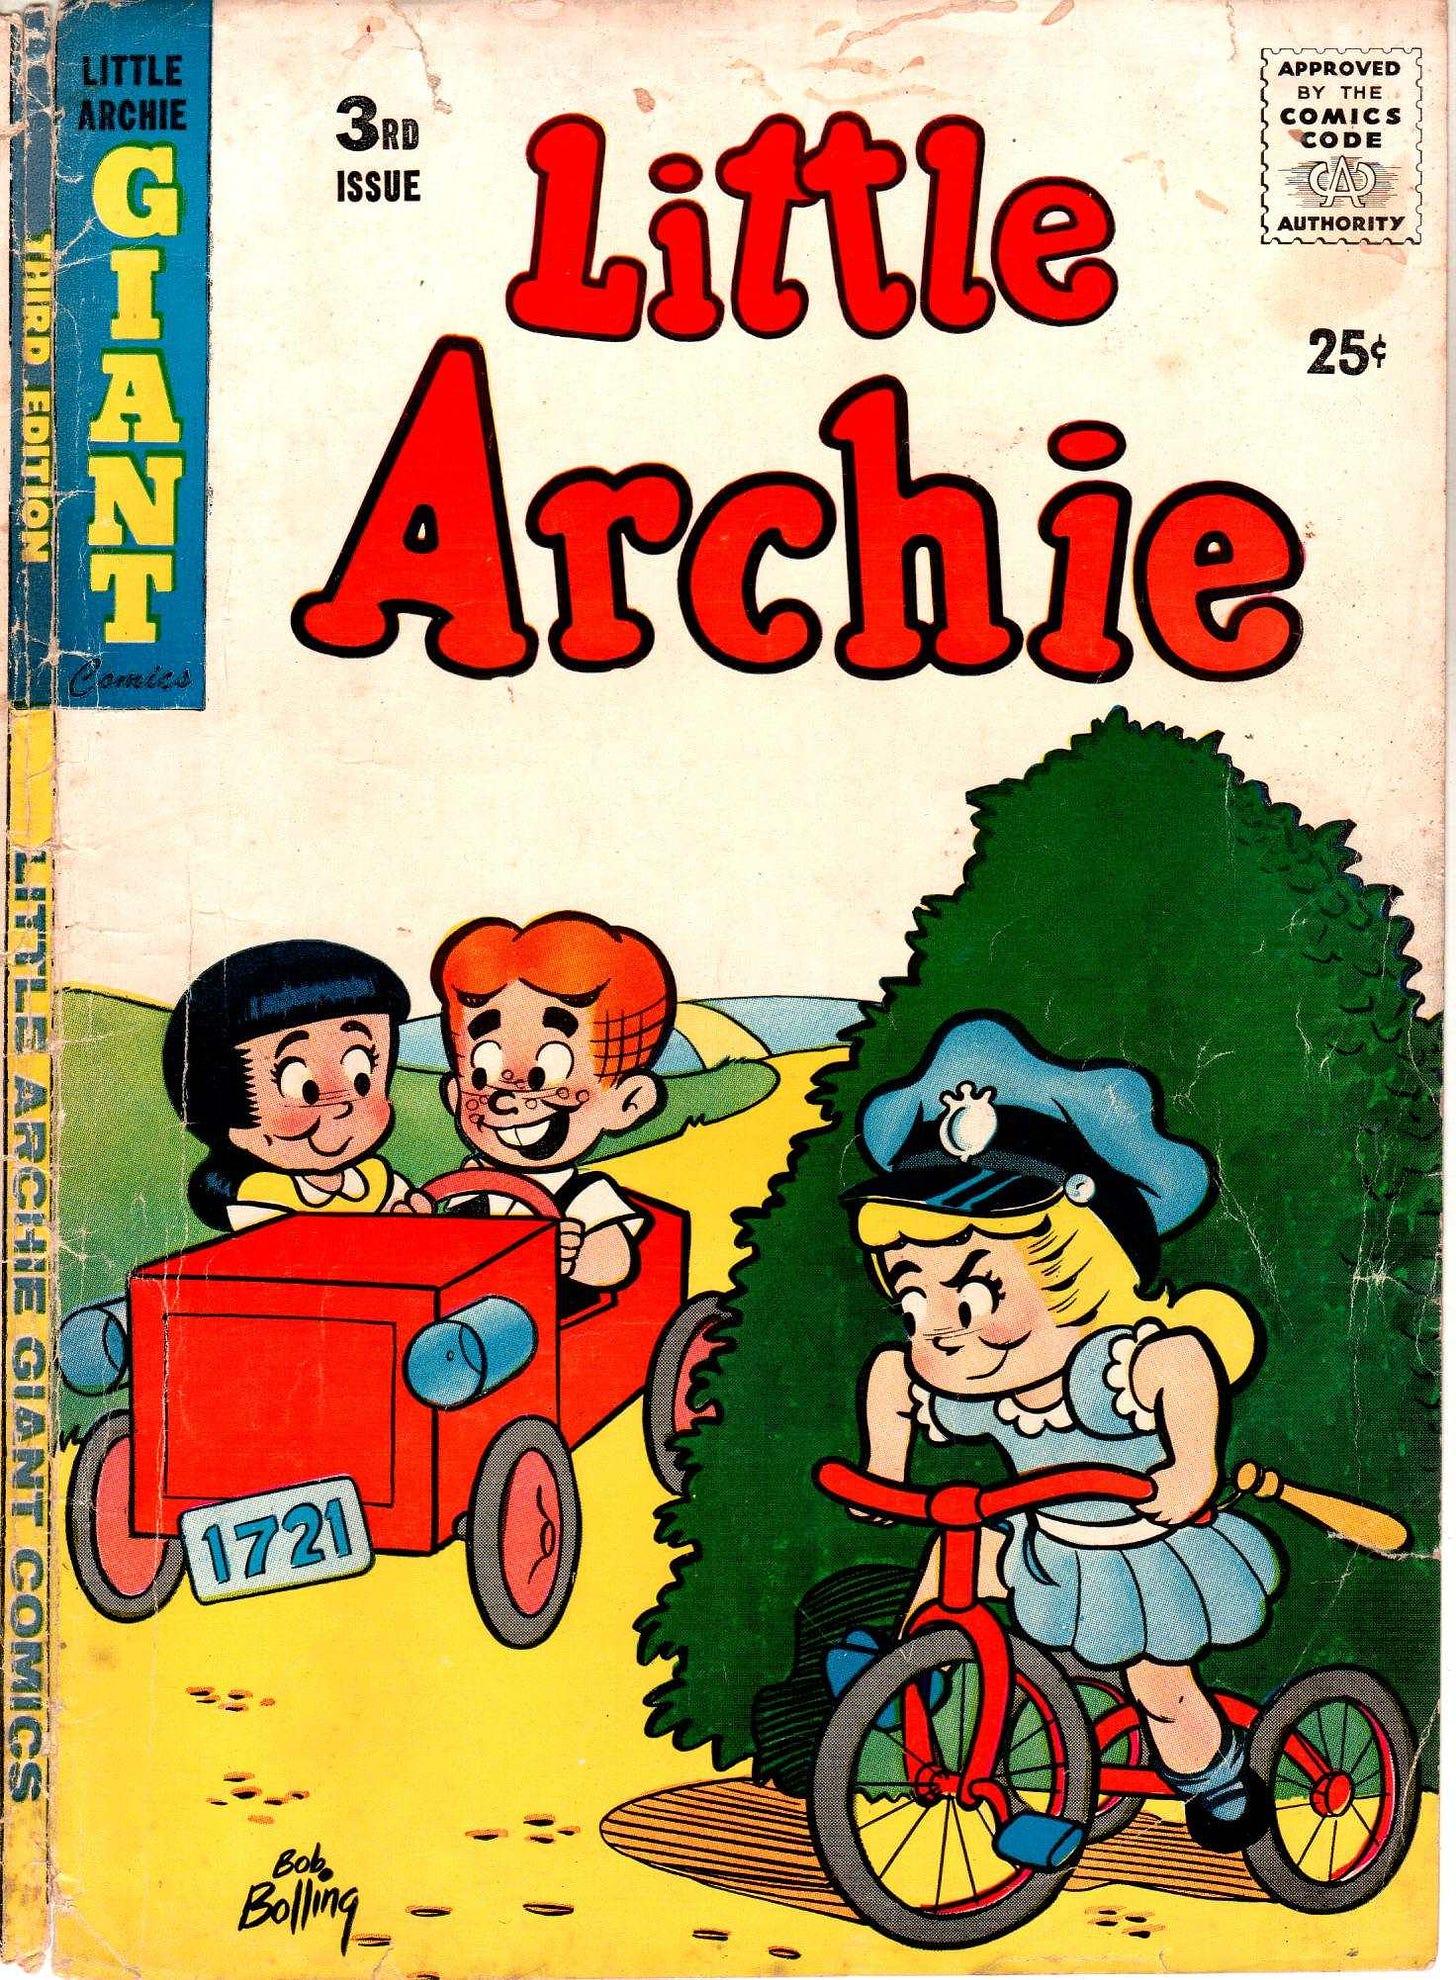 Read Comics Online Free - Little Archie (1956) Comic Book Issue #003 - Page  1